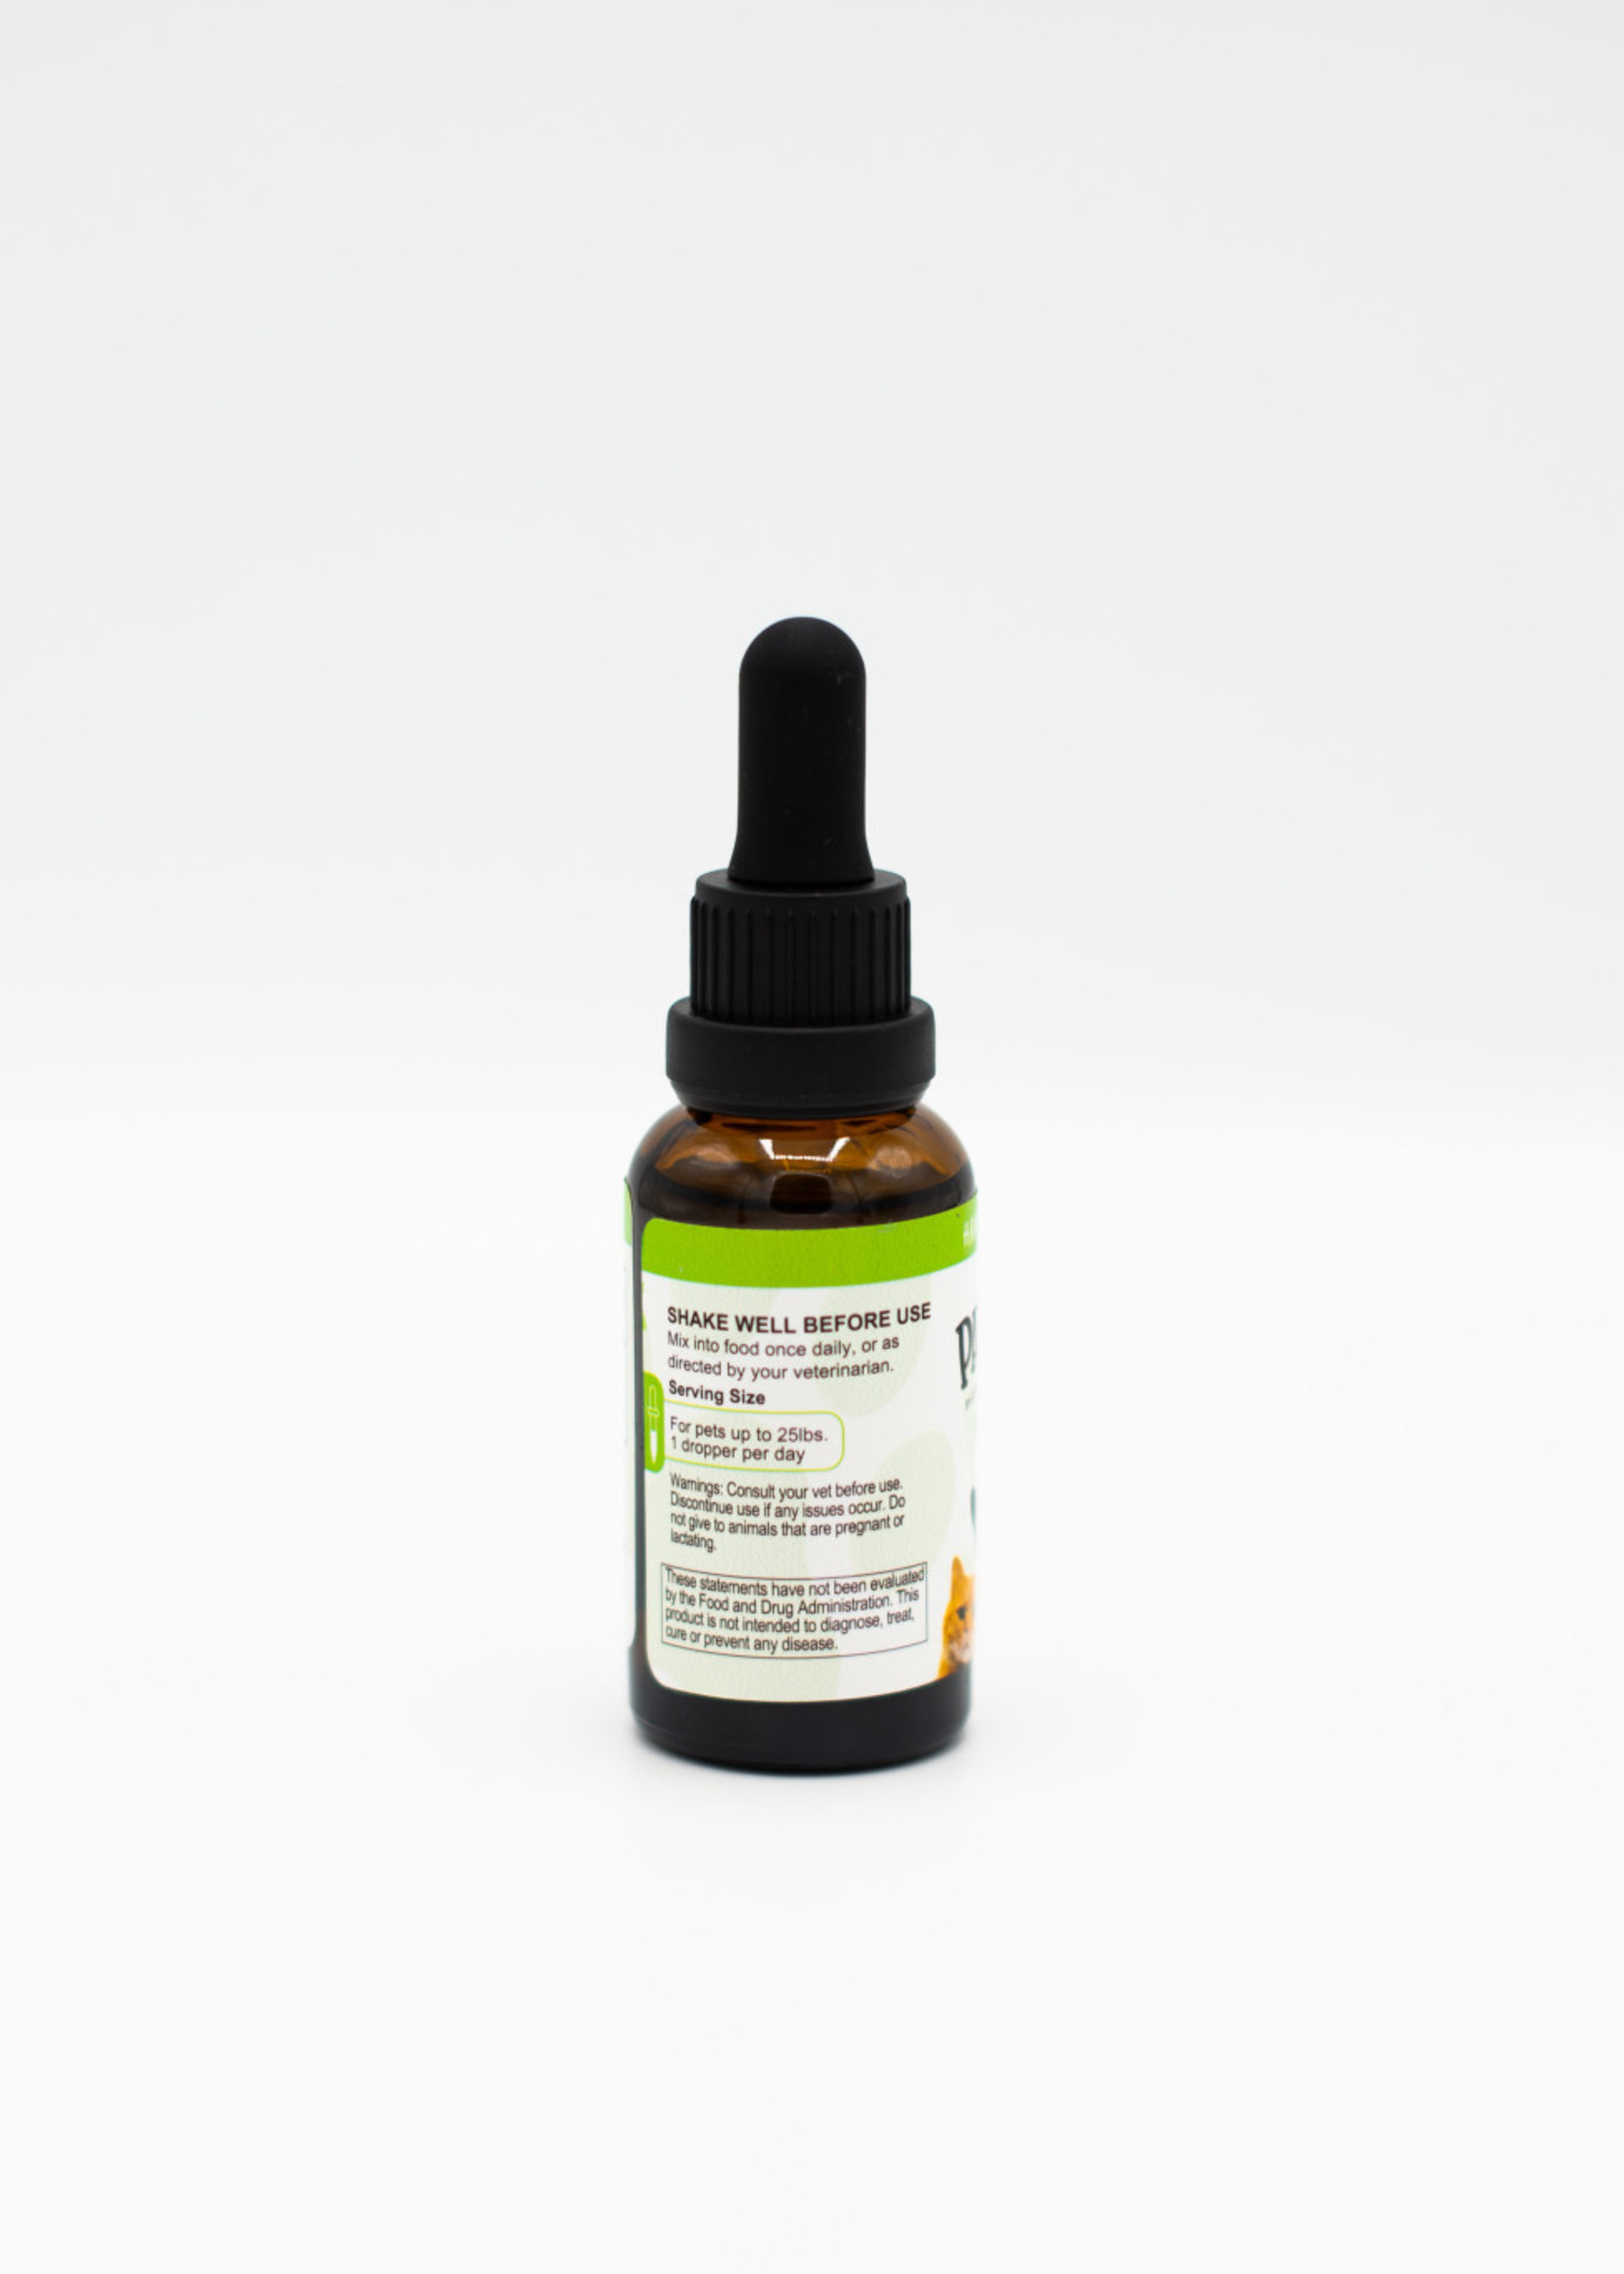 Our entry level CBD oil for pets. For dogs and cats under 25lbs.